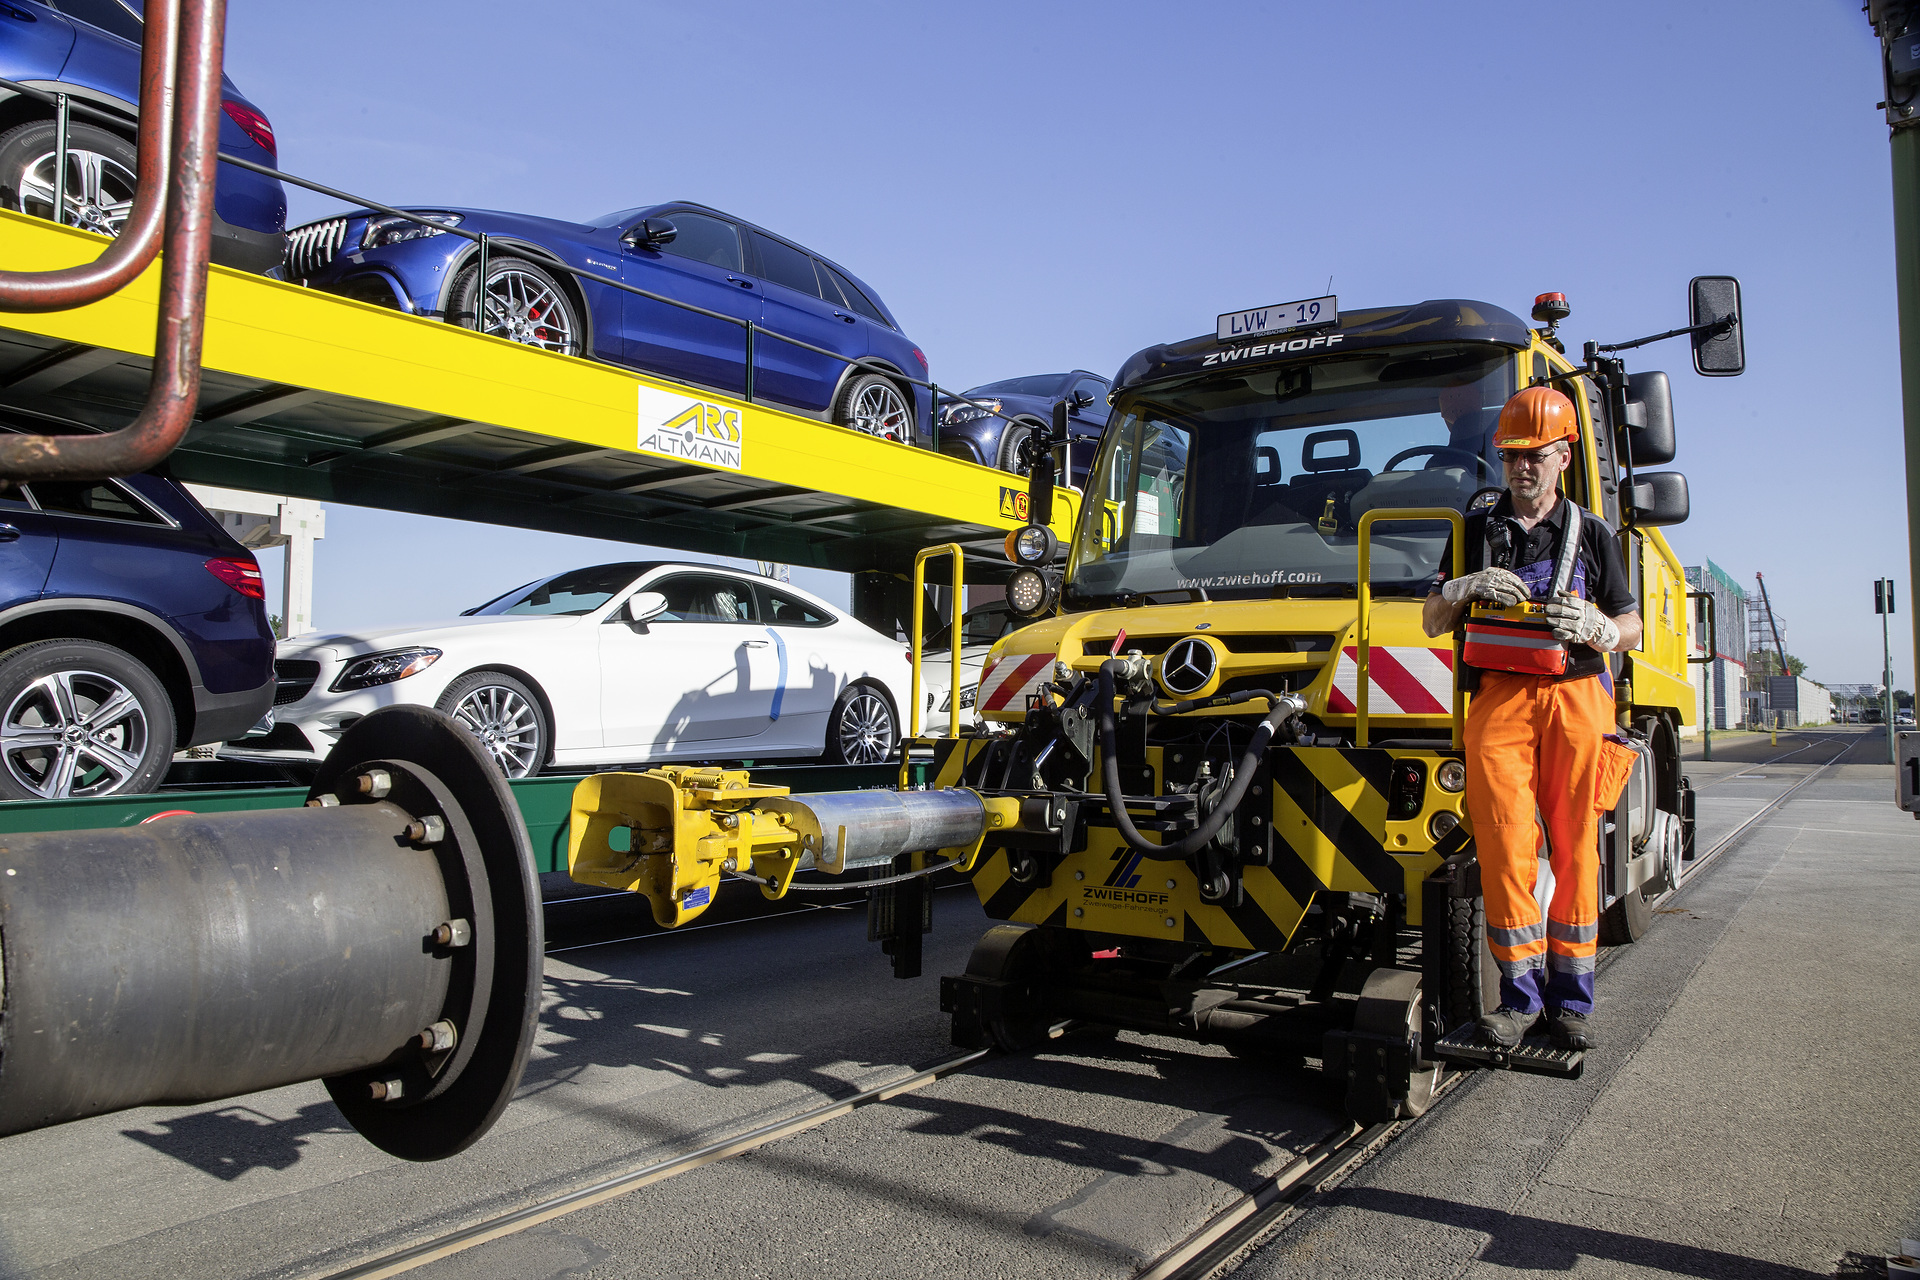 Mercedes-Benz presents the Unimog at InnoTrans 2018: The Unimog road-railer: Efficient on road and rail